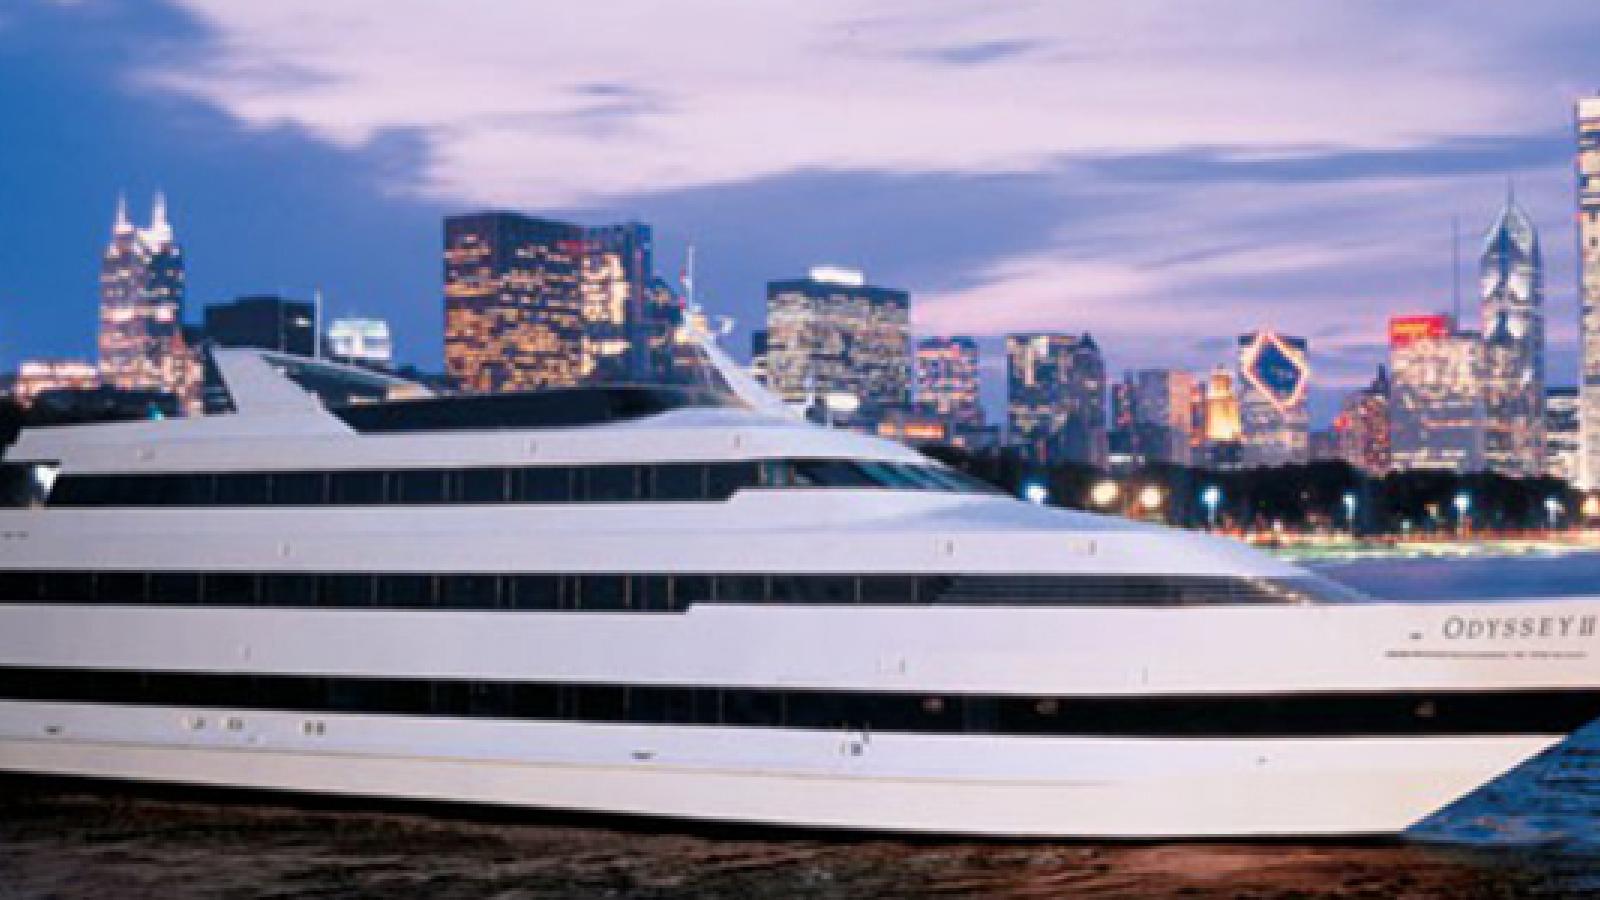 odyssey cruise line of chicago